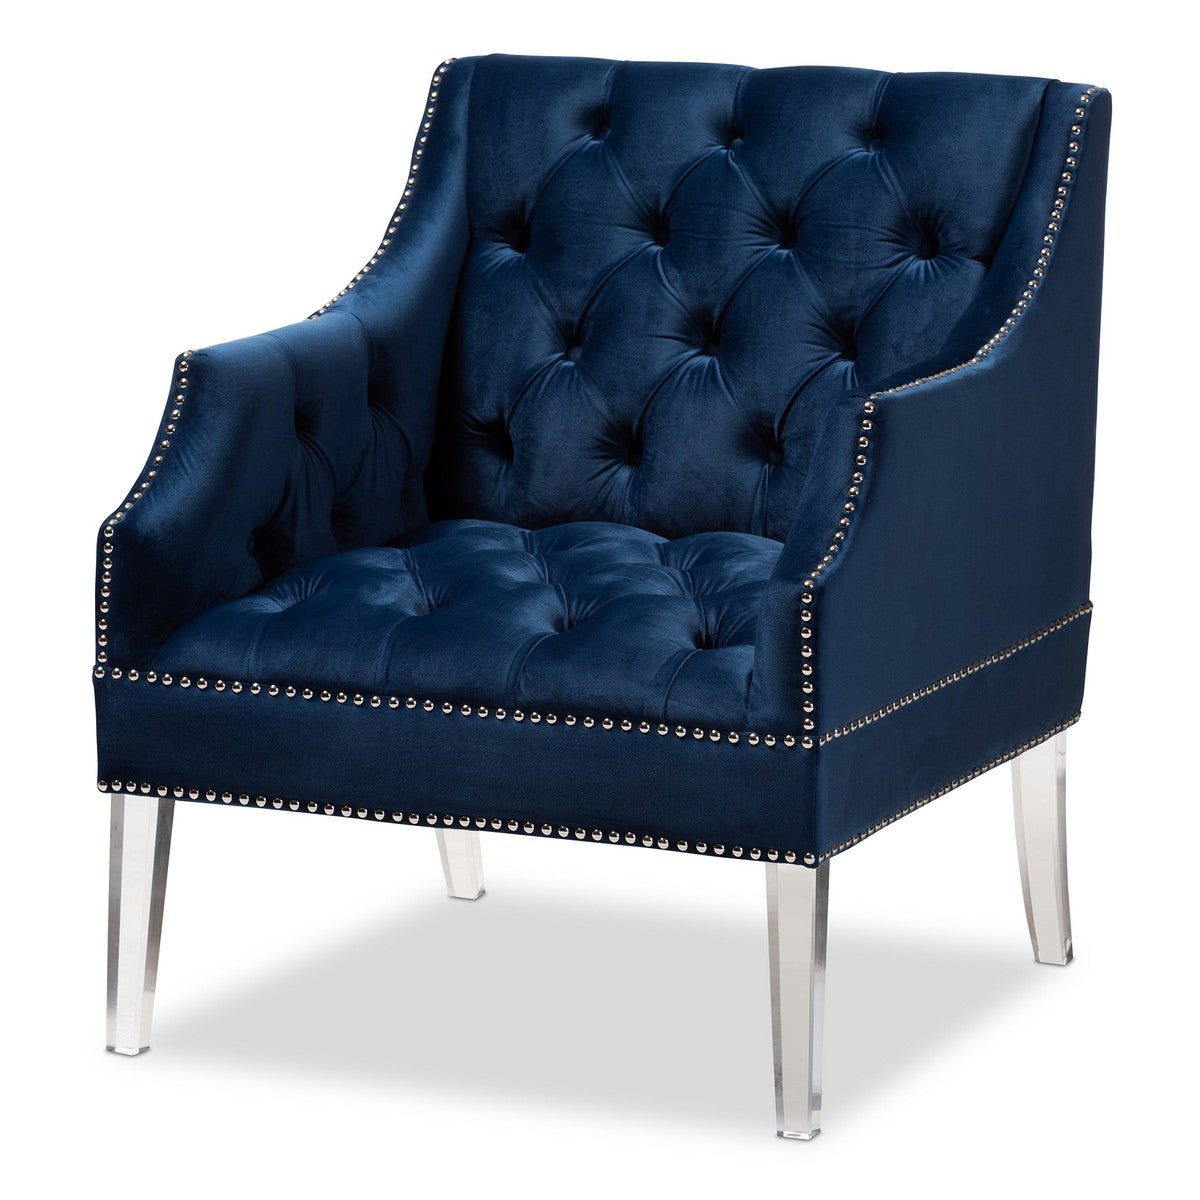 Baxton Studio Silvana Modern and Contemporary Navy Velvet Fabric Upholstered Lounge Chair with Acrylic Legs Baxton Studio-chairs-Minimal And Modern - 1